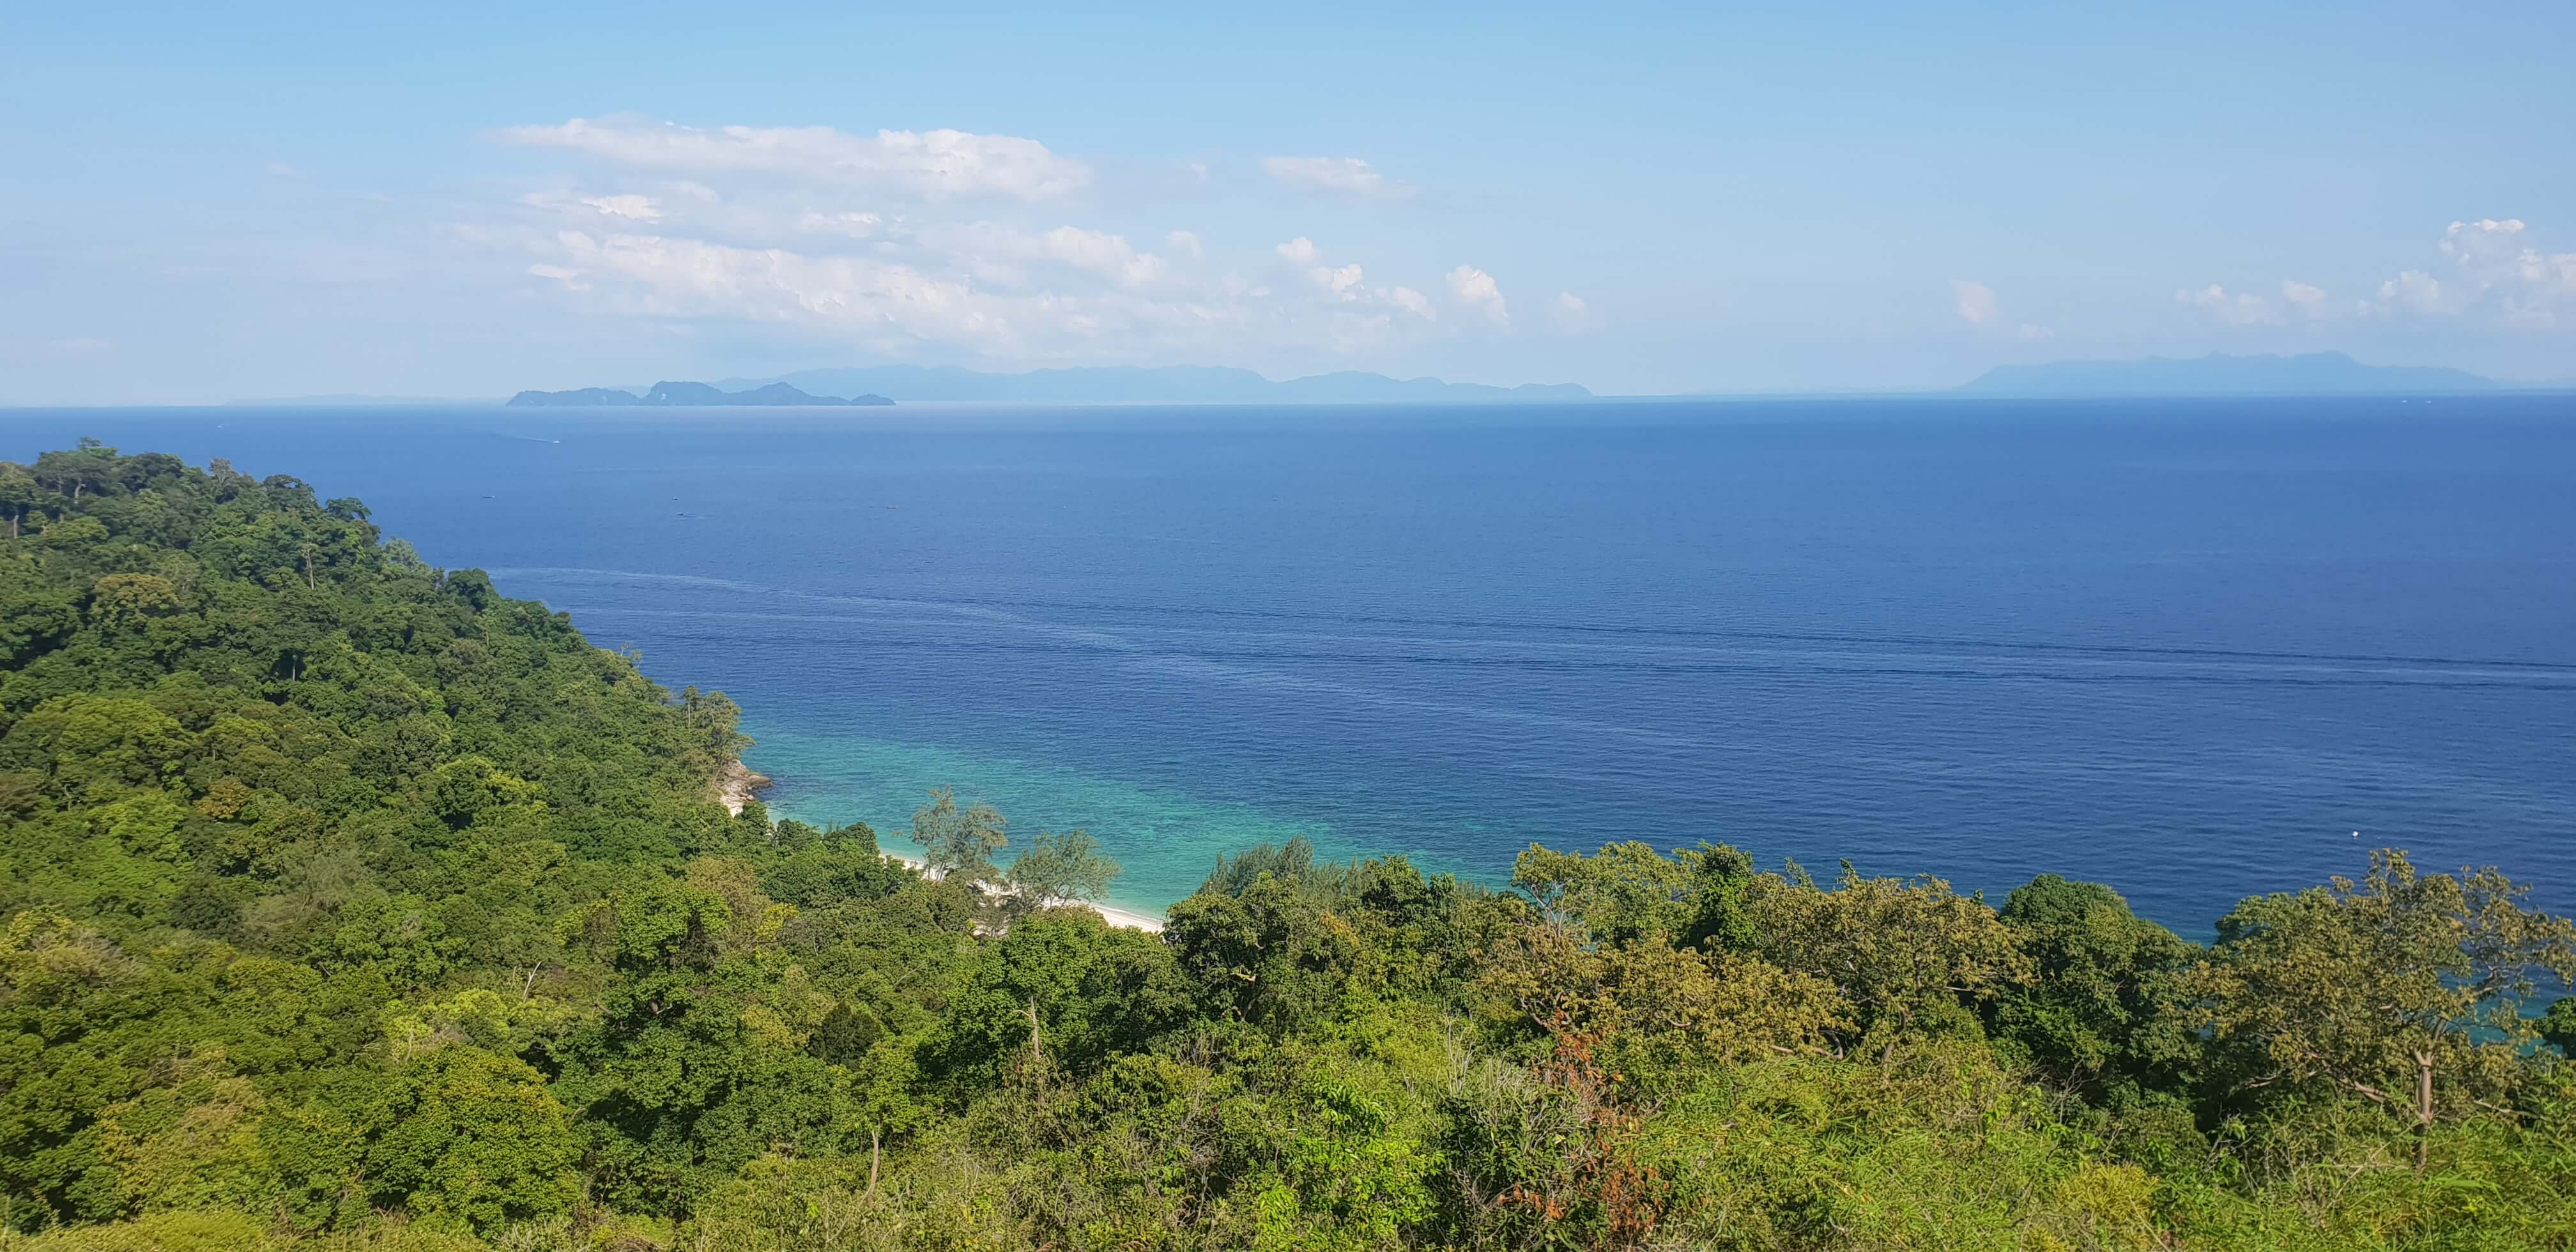 View from the Koh Lipe viewpoint at Koh Adang